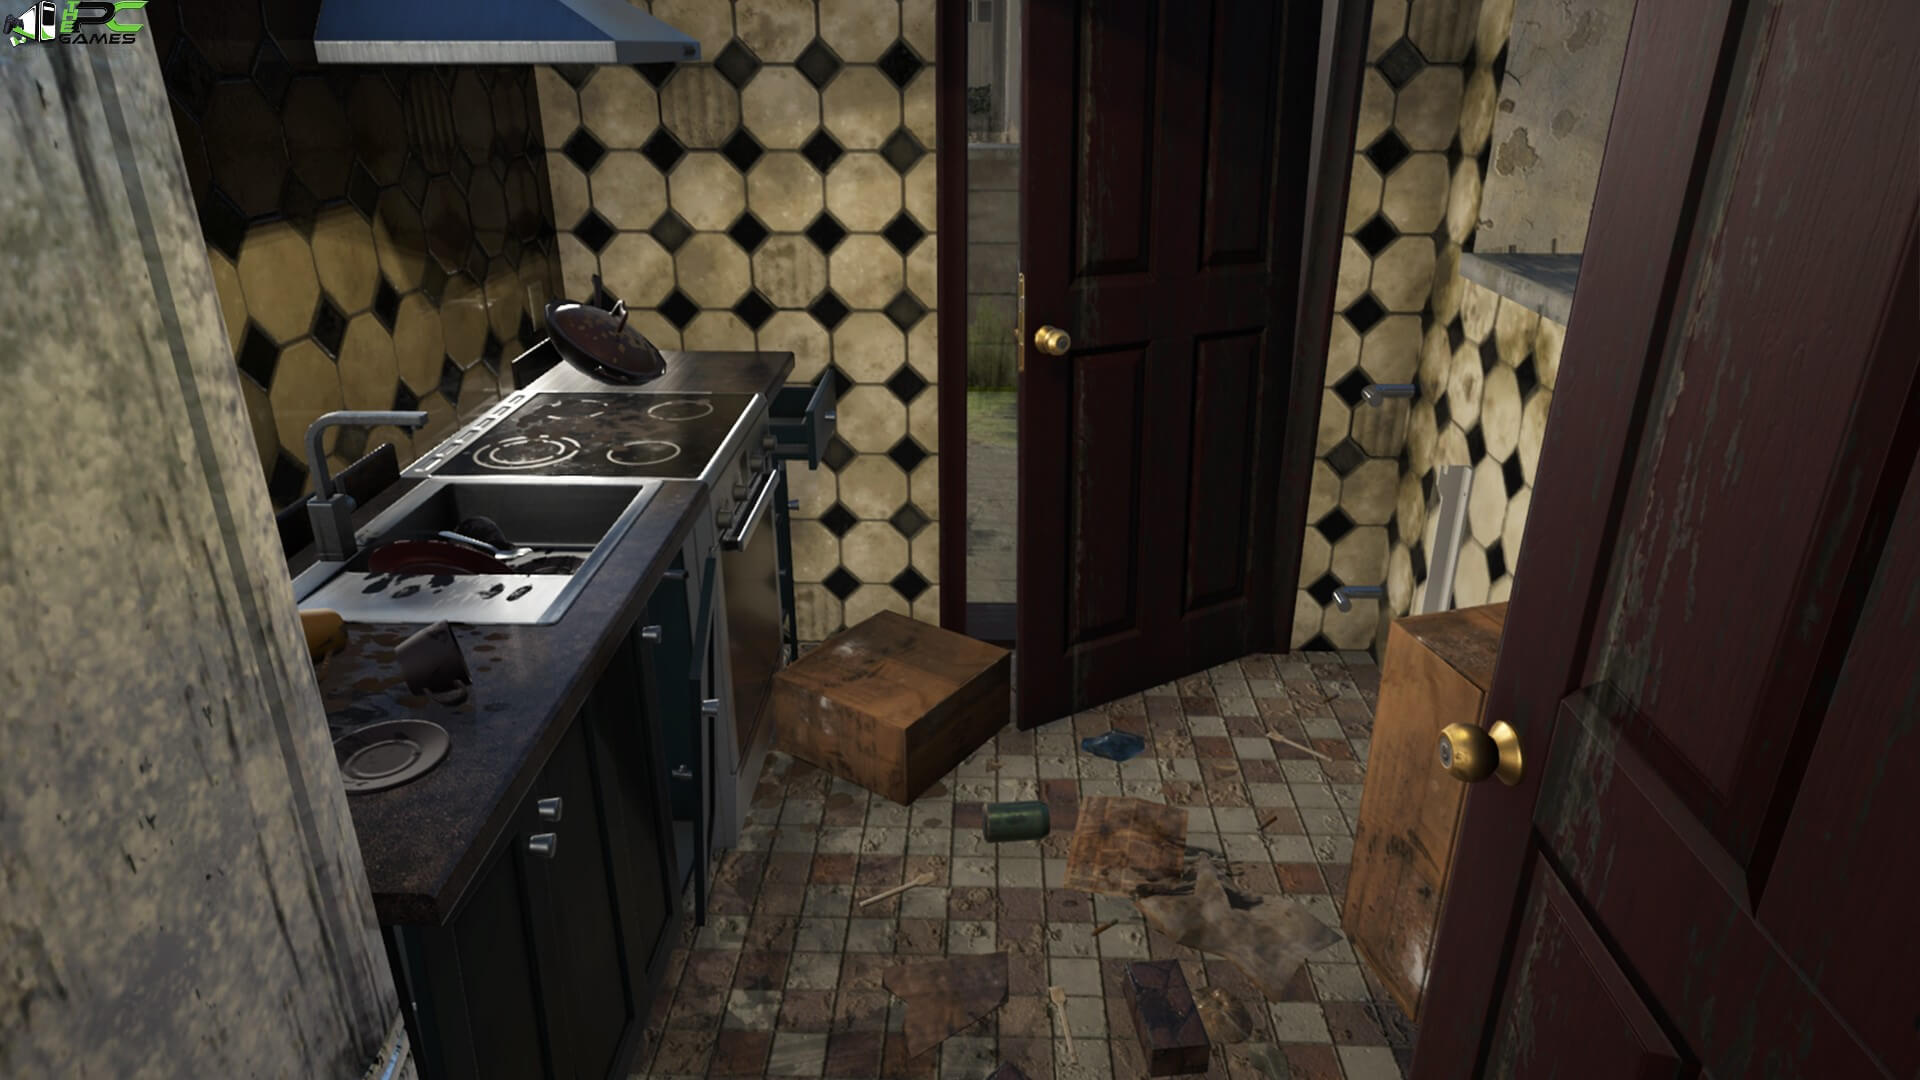 house flipper free game pc